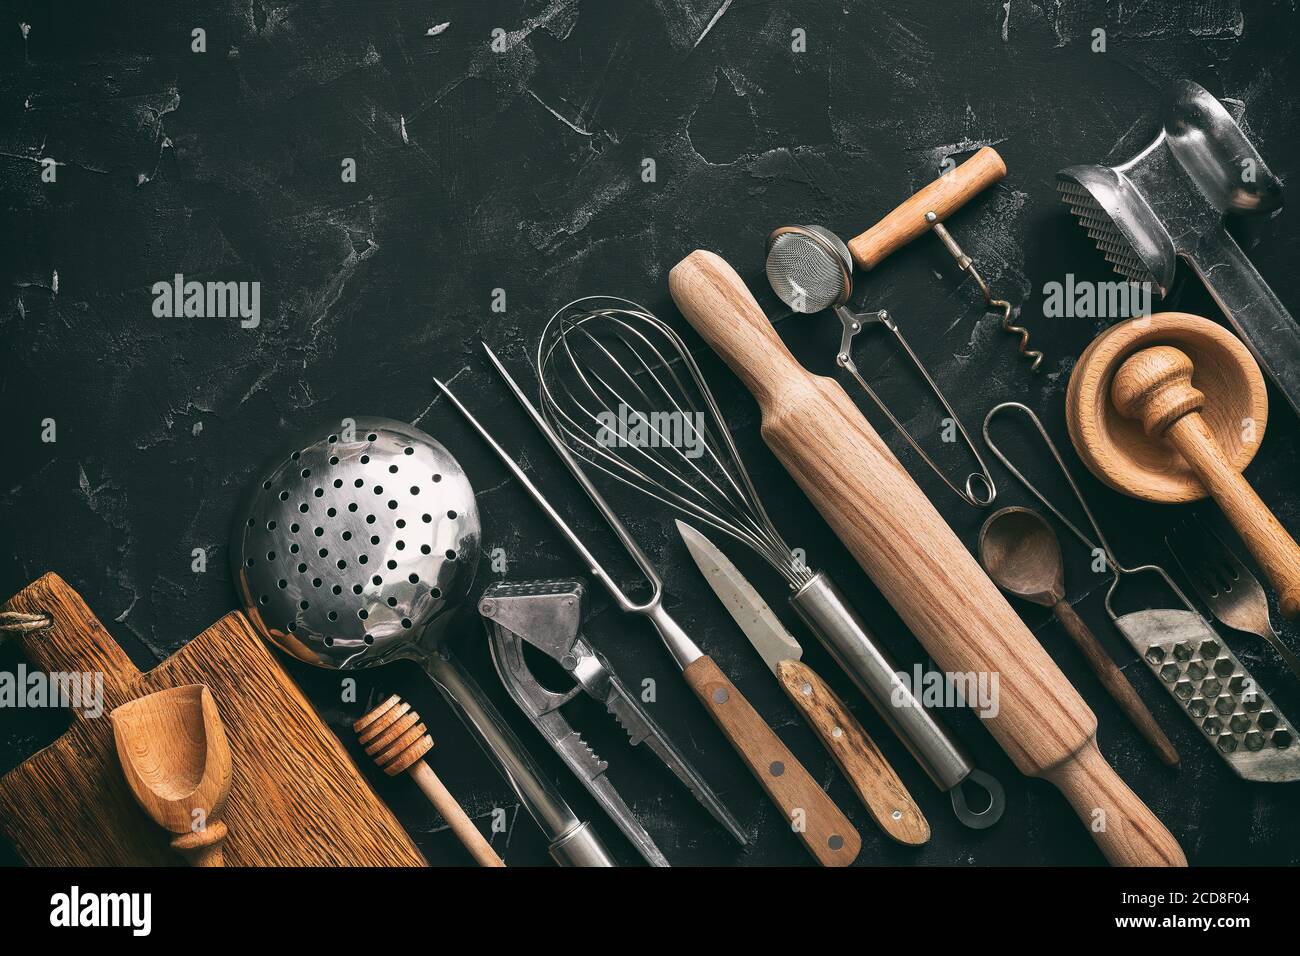 Various kitchen utensils and tools on a black stone background, corner frame. Top view, flat lay, copy space. Collection kitchenware Stock Photo